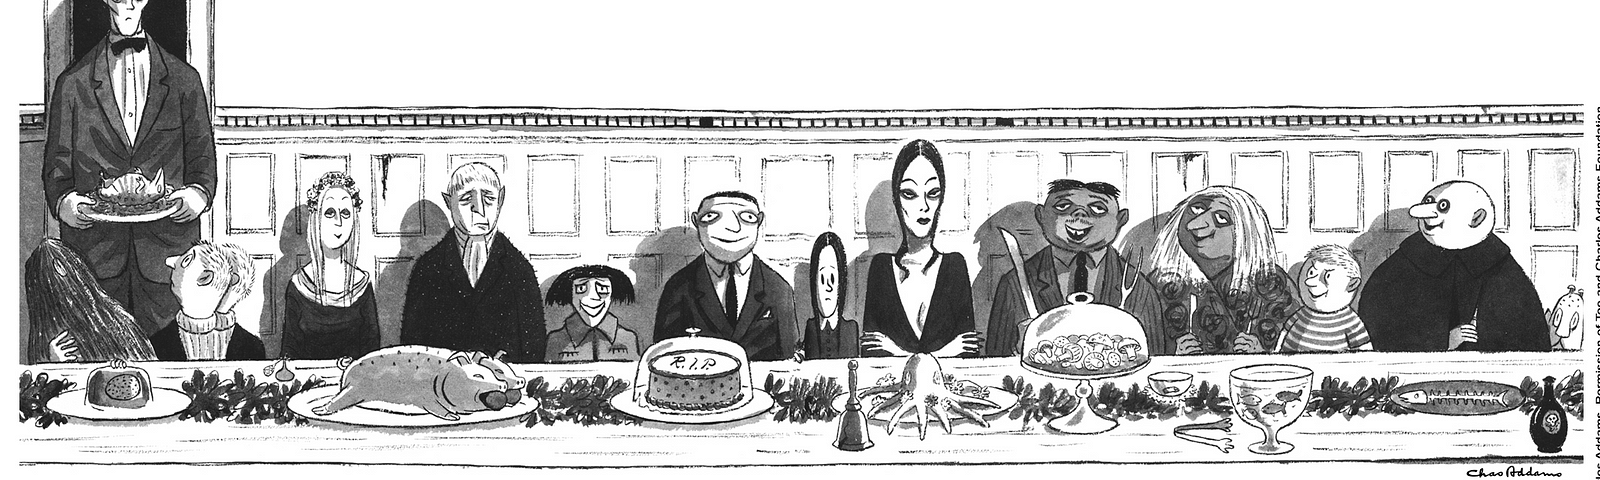 An Addams Family History. You know they're creepy and they're… | by Dan  Owen | Dans Media Digest